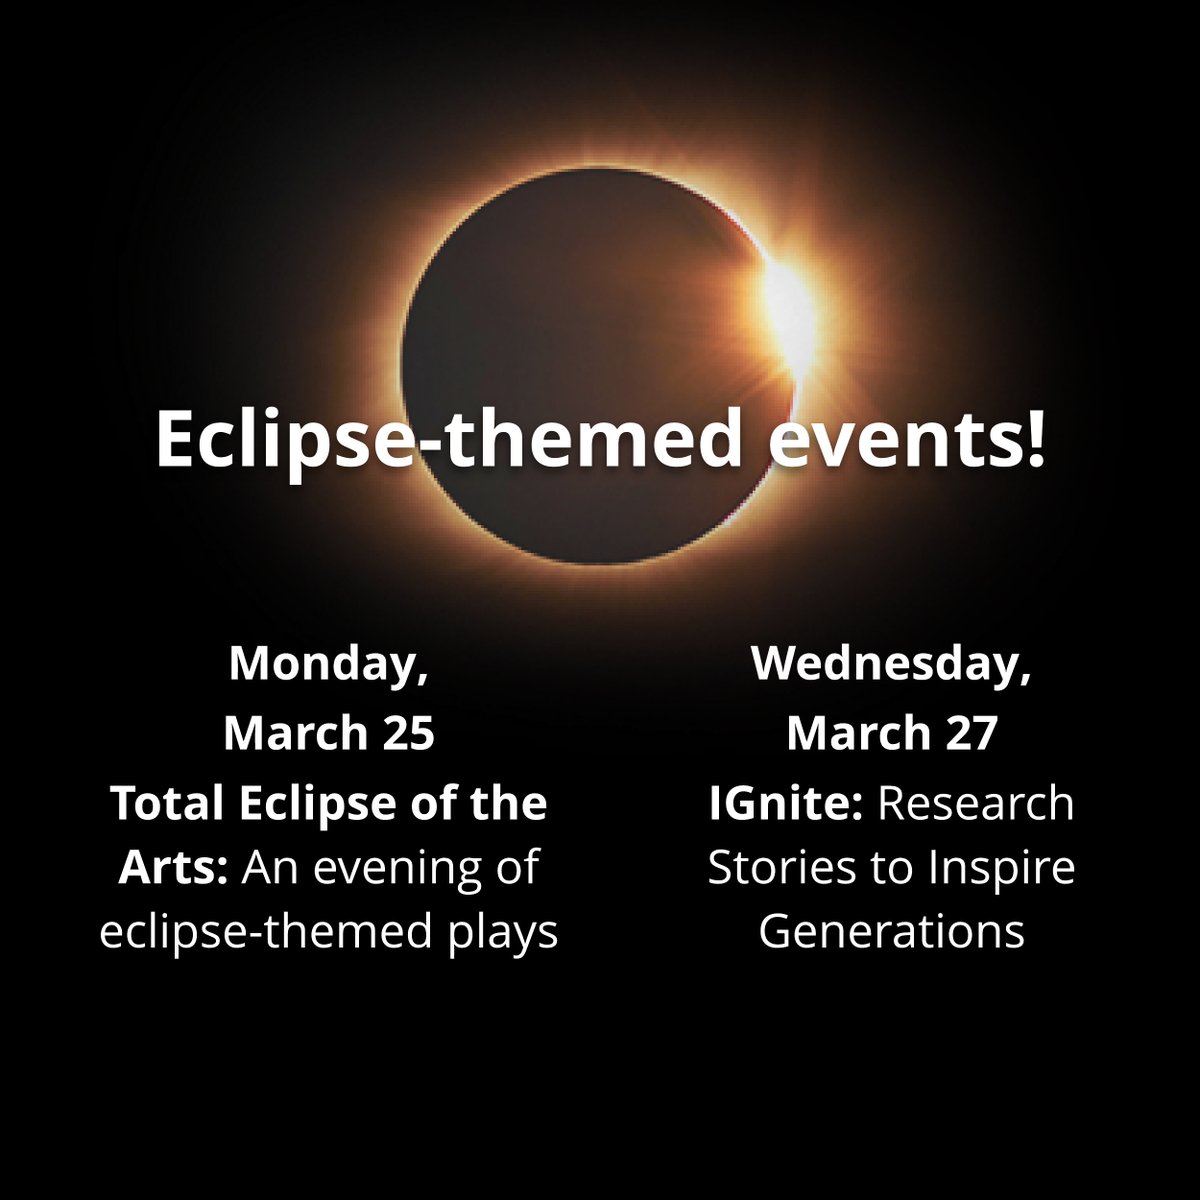 It's a great time to be an Eclipse fan! Two amazing events happening in Kingston next week! Eclipse-themed plays on Monday, and two amazing science talks on Wednesday! Check it all out in our linktree: linktr.ee/McDonaldInstit…